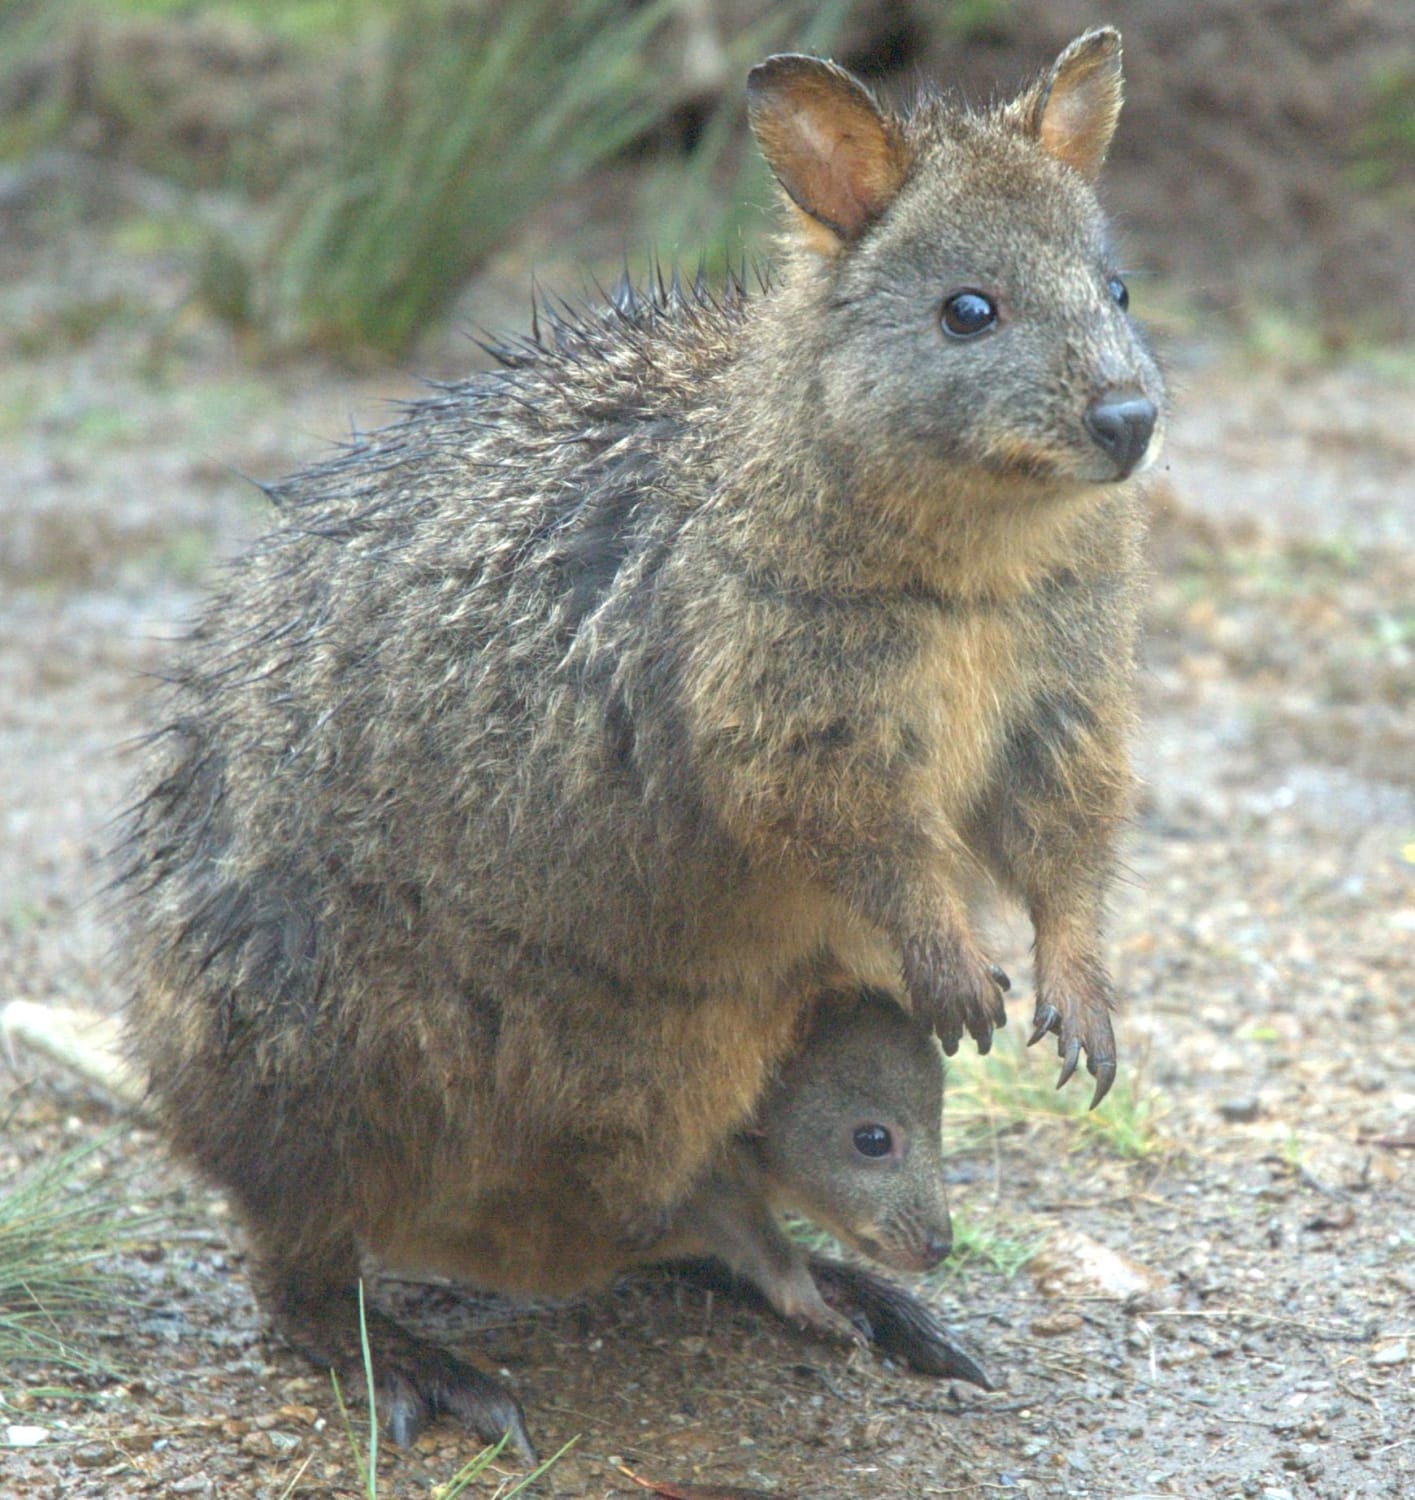 This is a Pademelon, a small marsupial. Very similar to kangaroos, pademelons are native to the woodland and forests of Australia, Tasmania and New Guinea. They hop around, much like kangas, and have been known to burrow tunnels through swamps and marshlands (Photo: Commons/Wikipedia)